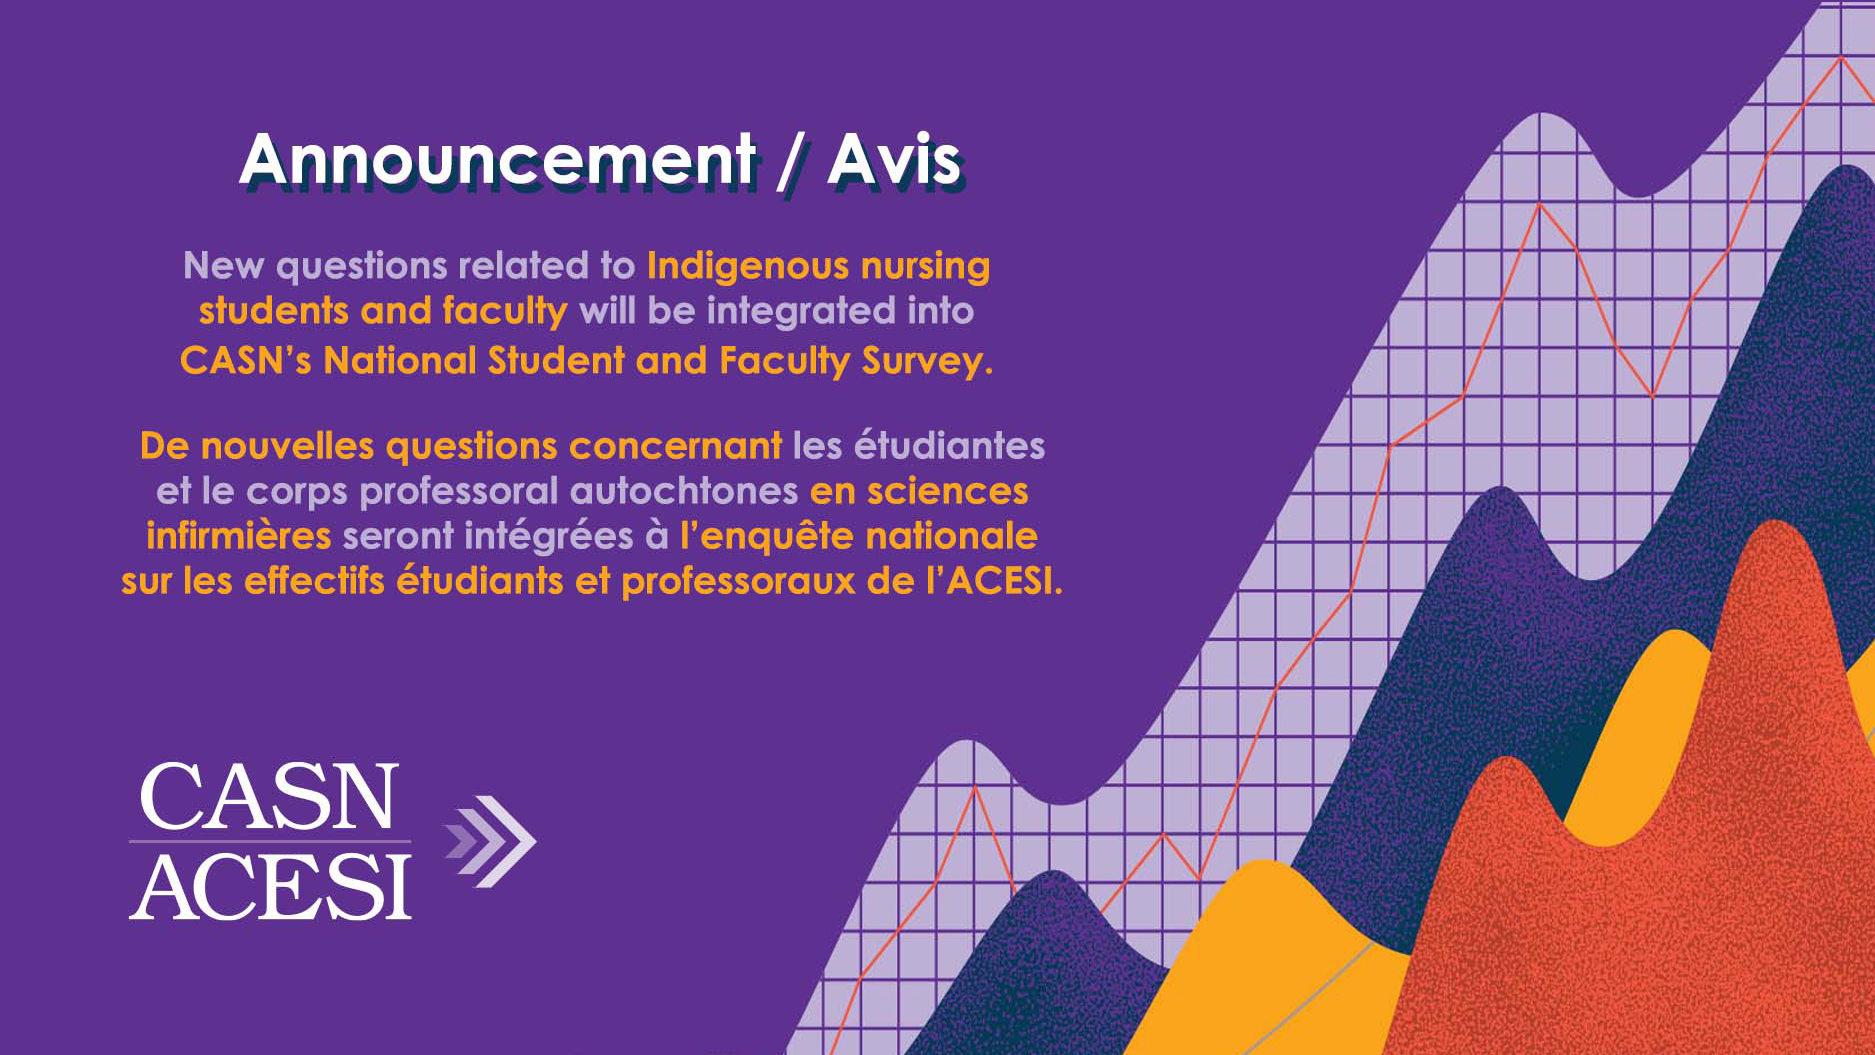 Announcement: Integration of Indigenous Nursing Student and Faculty Survey Questions into CASN’s 2020-2021 National Student and Faculty Survey